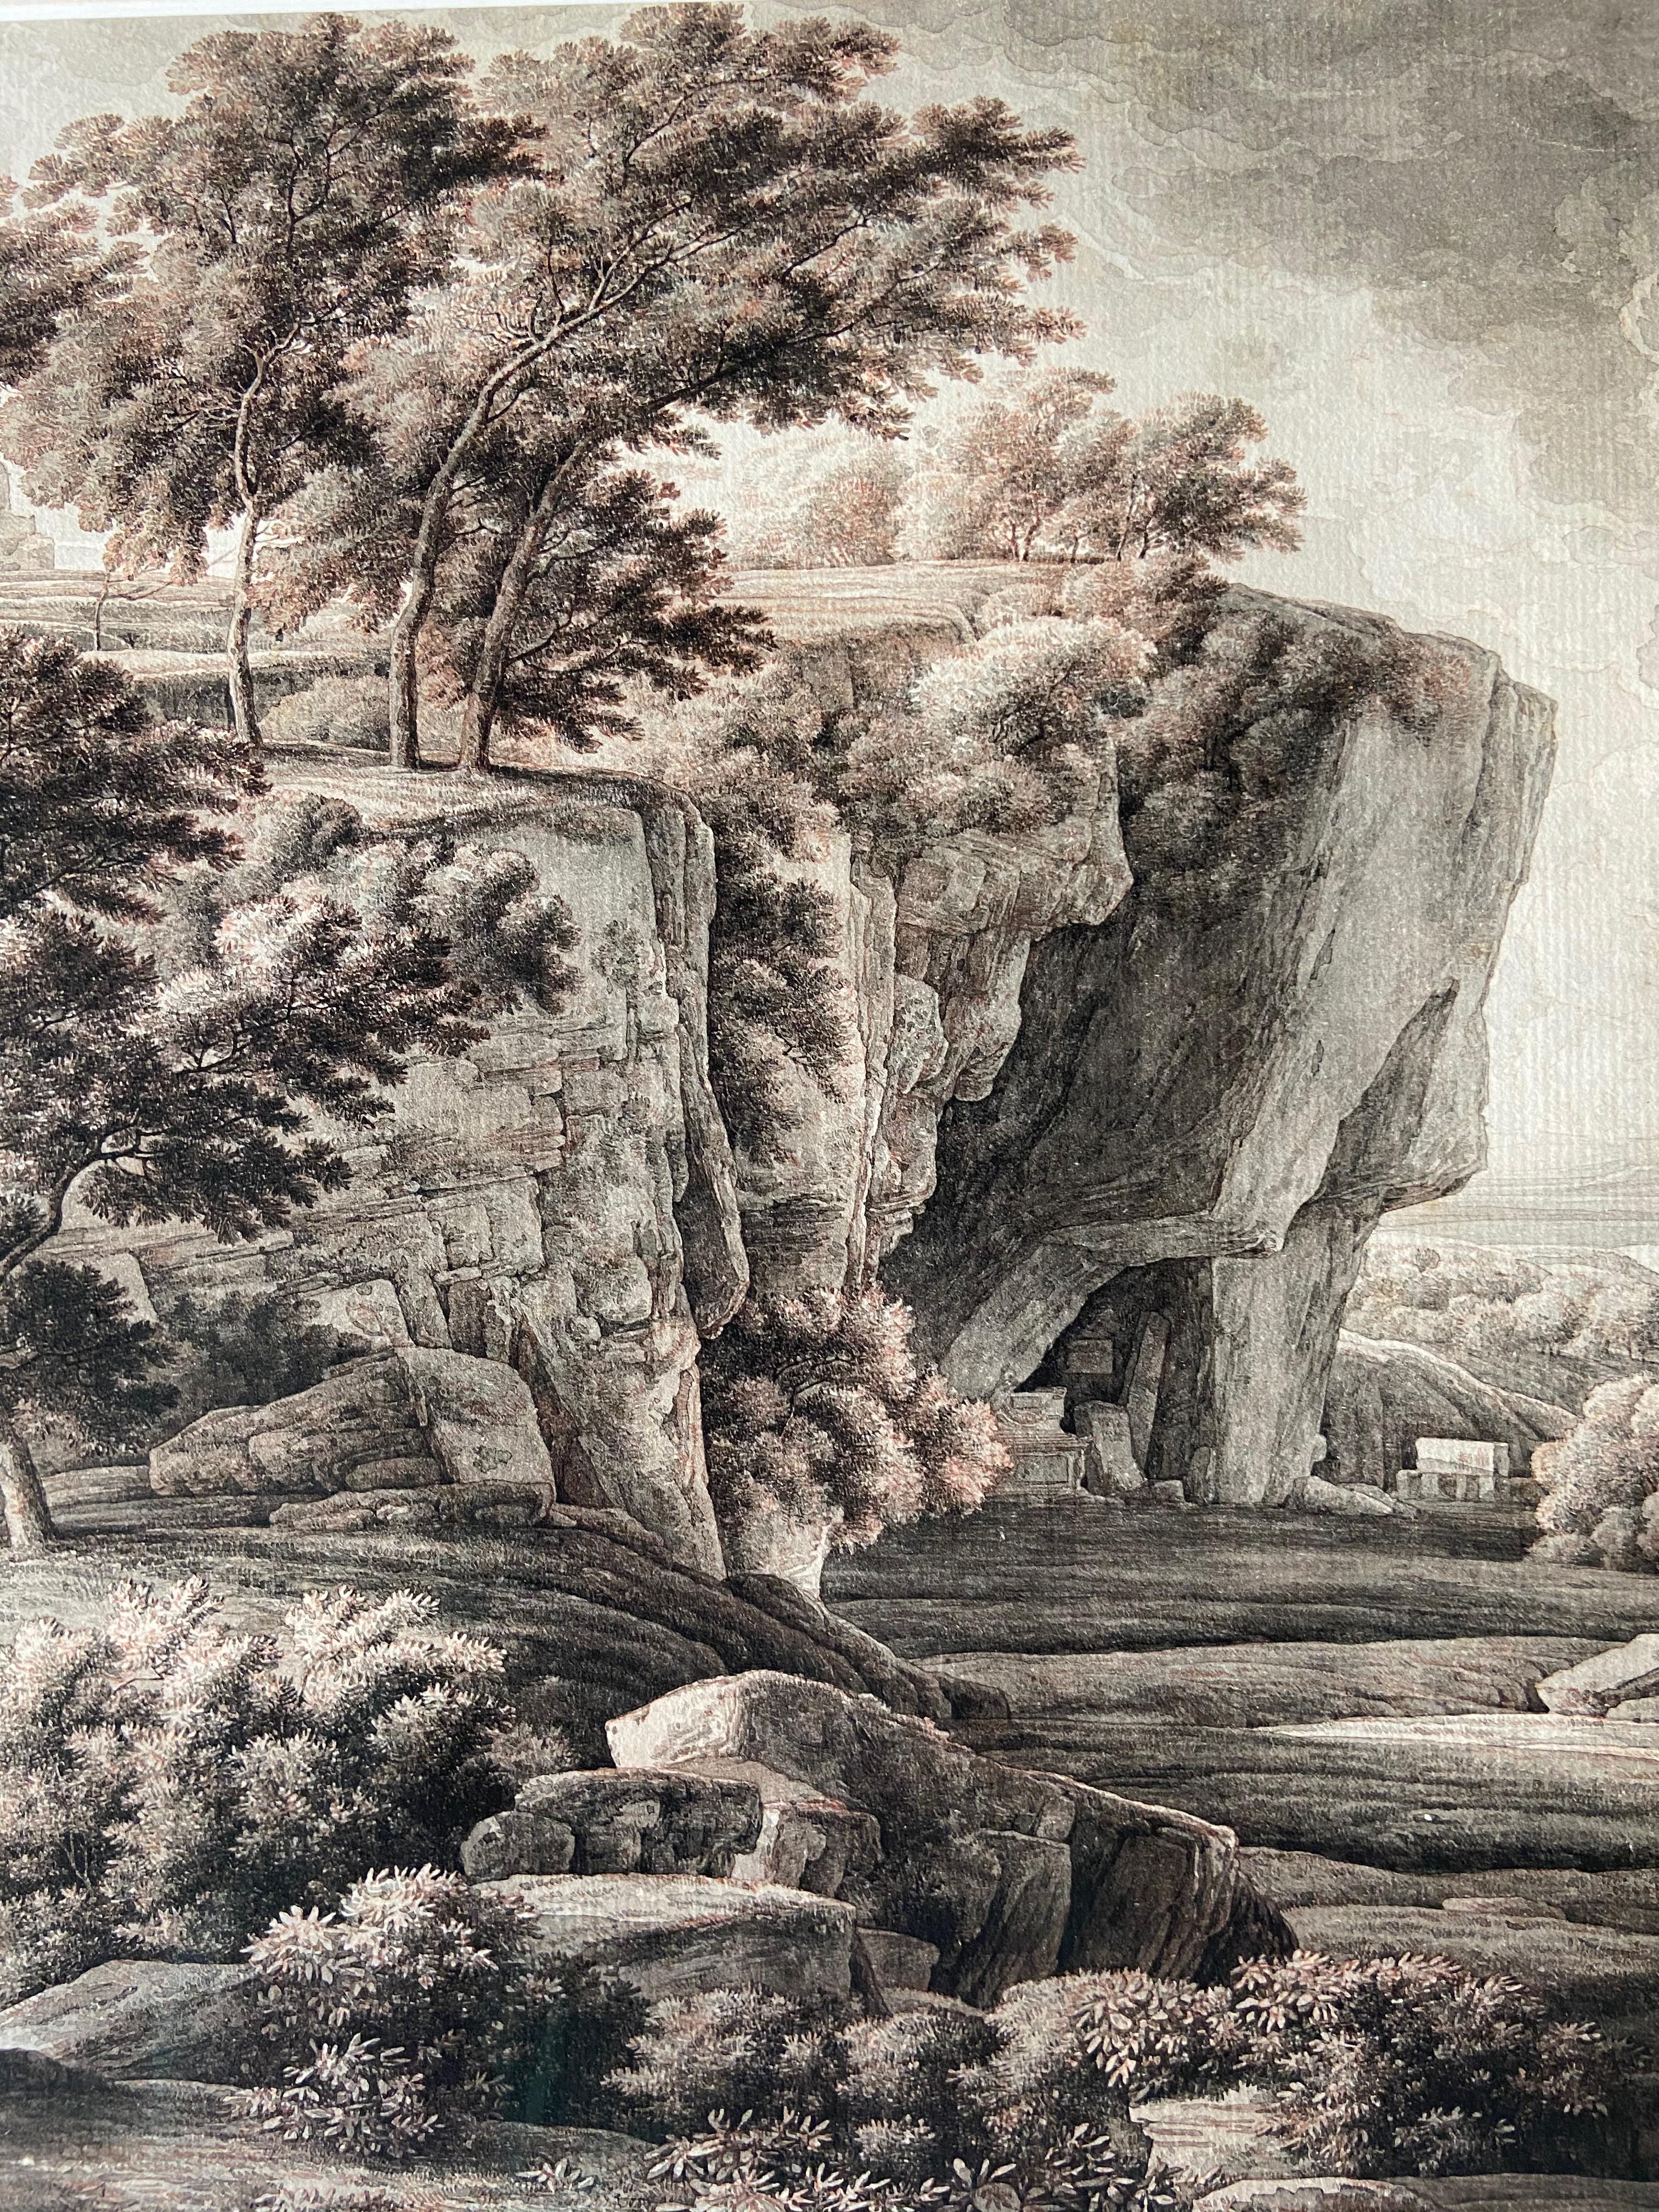 18TH CENTURY ROMAN LANDSCAPE WTH FIGURES - BY ABRAHAM LOUIS RODOLPHE DUCROS (1748-1810) 

Museum quality pen, grey ink and brown body colour landscape study with figures, by the Swiss watercolourist Abraham-Louis-Rodolphe Ducros (1748-1810)

Ducros